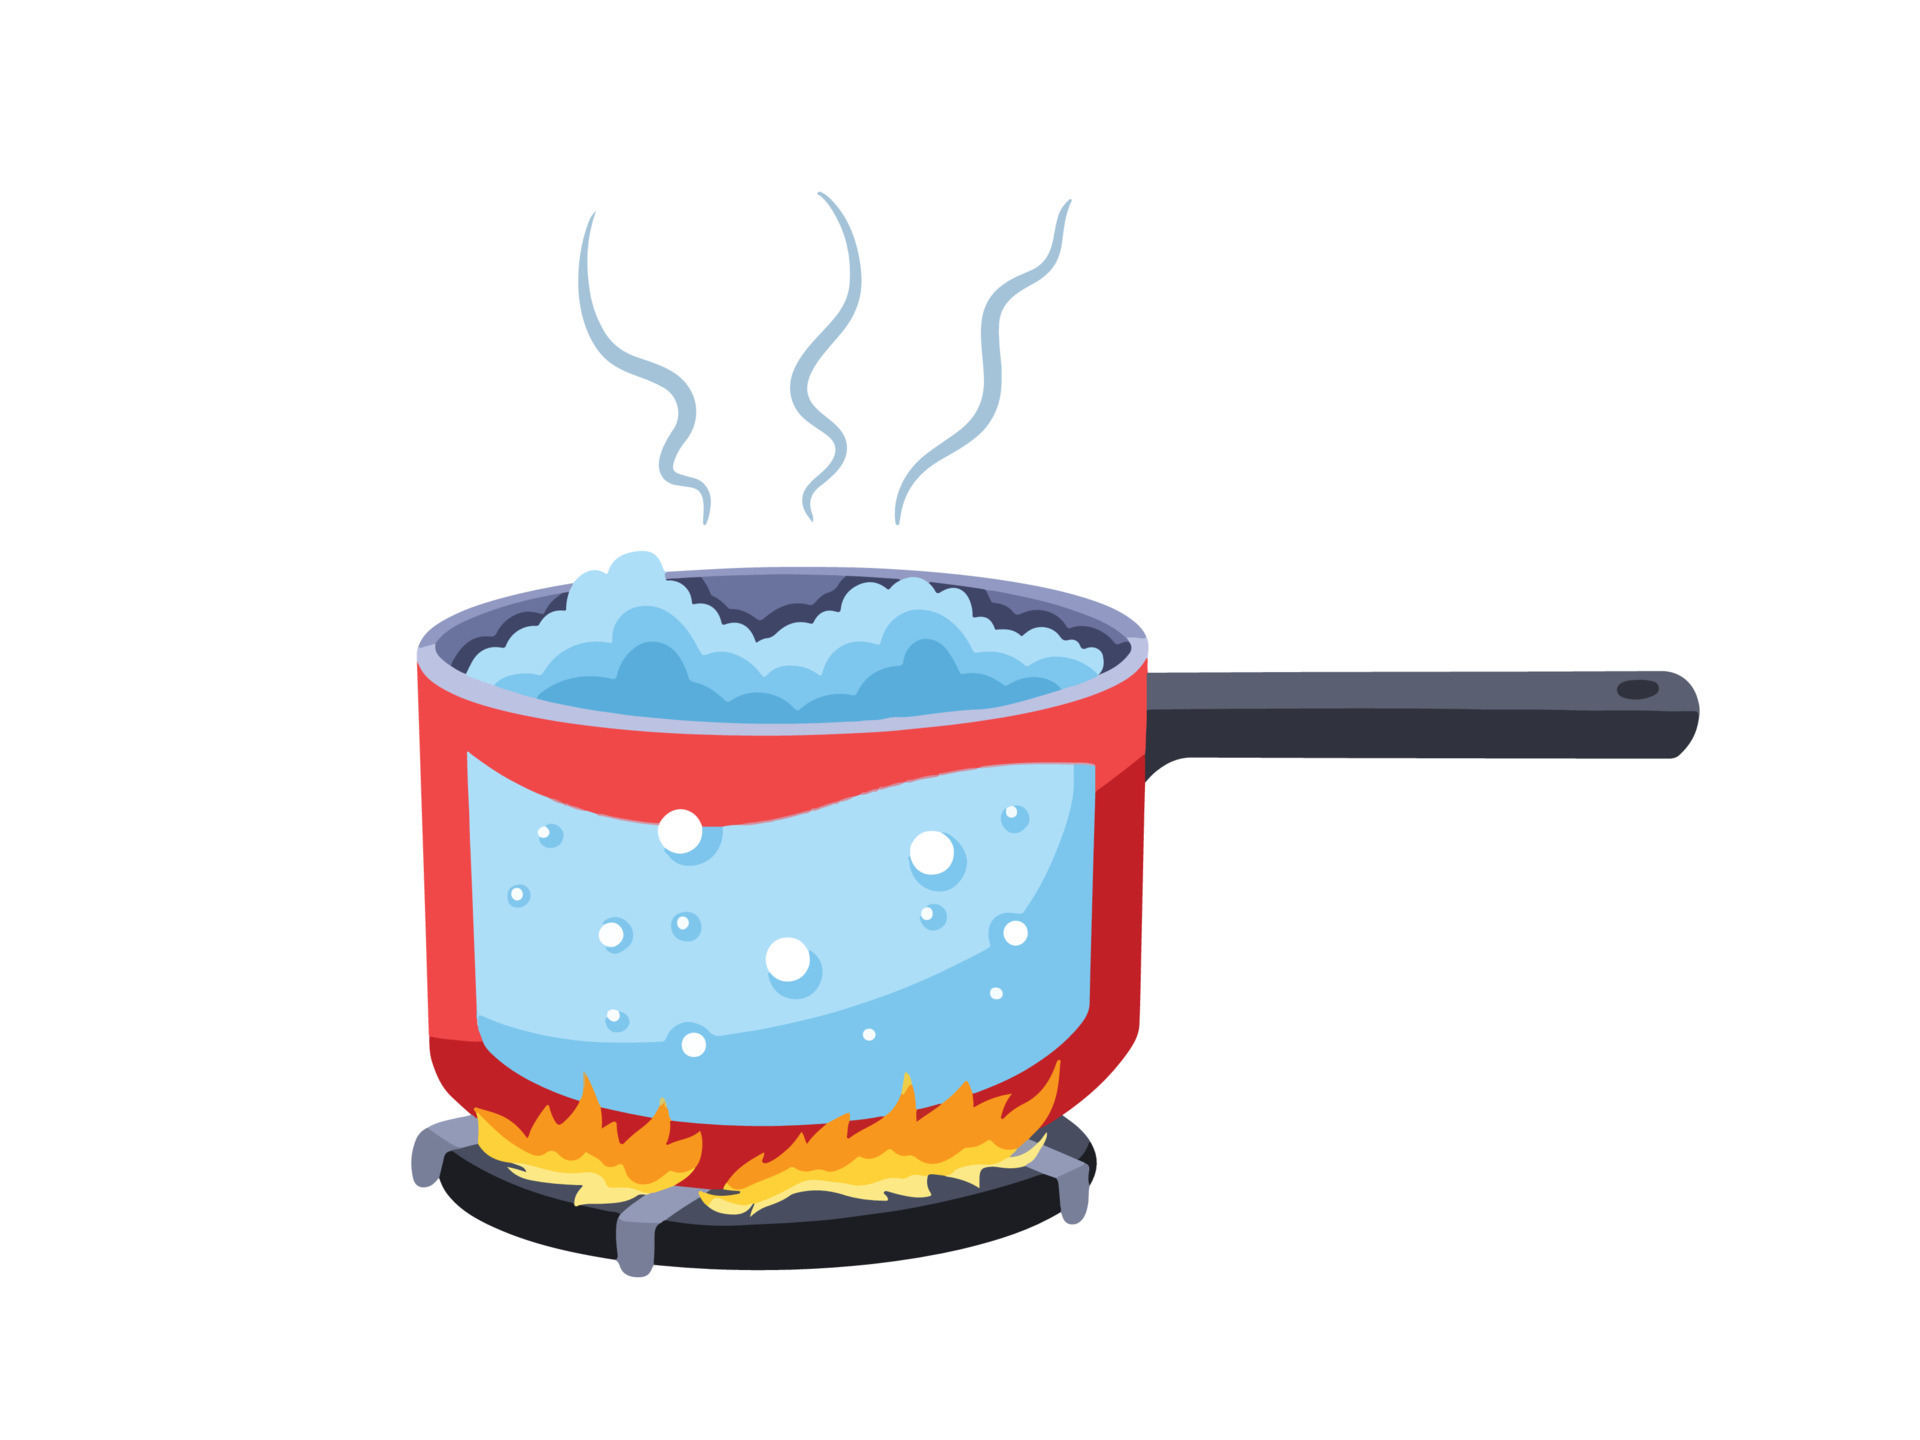 Boiling water in red pot pan on top of stove flames with smokes